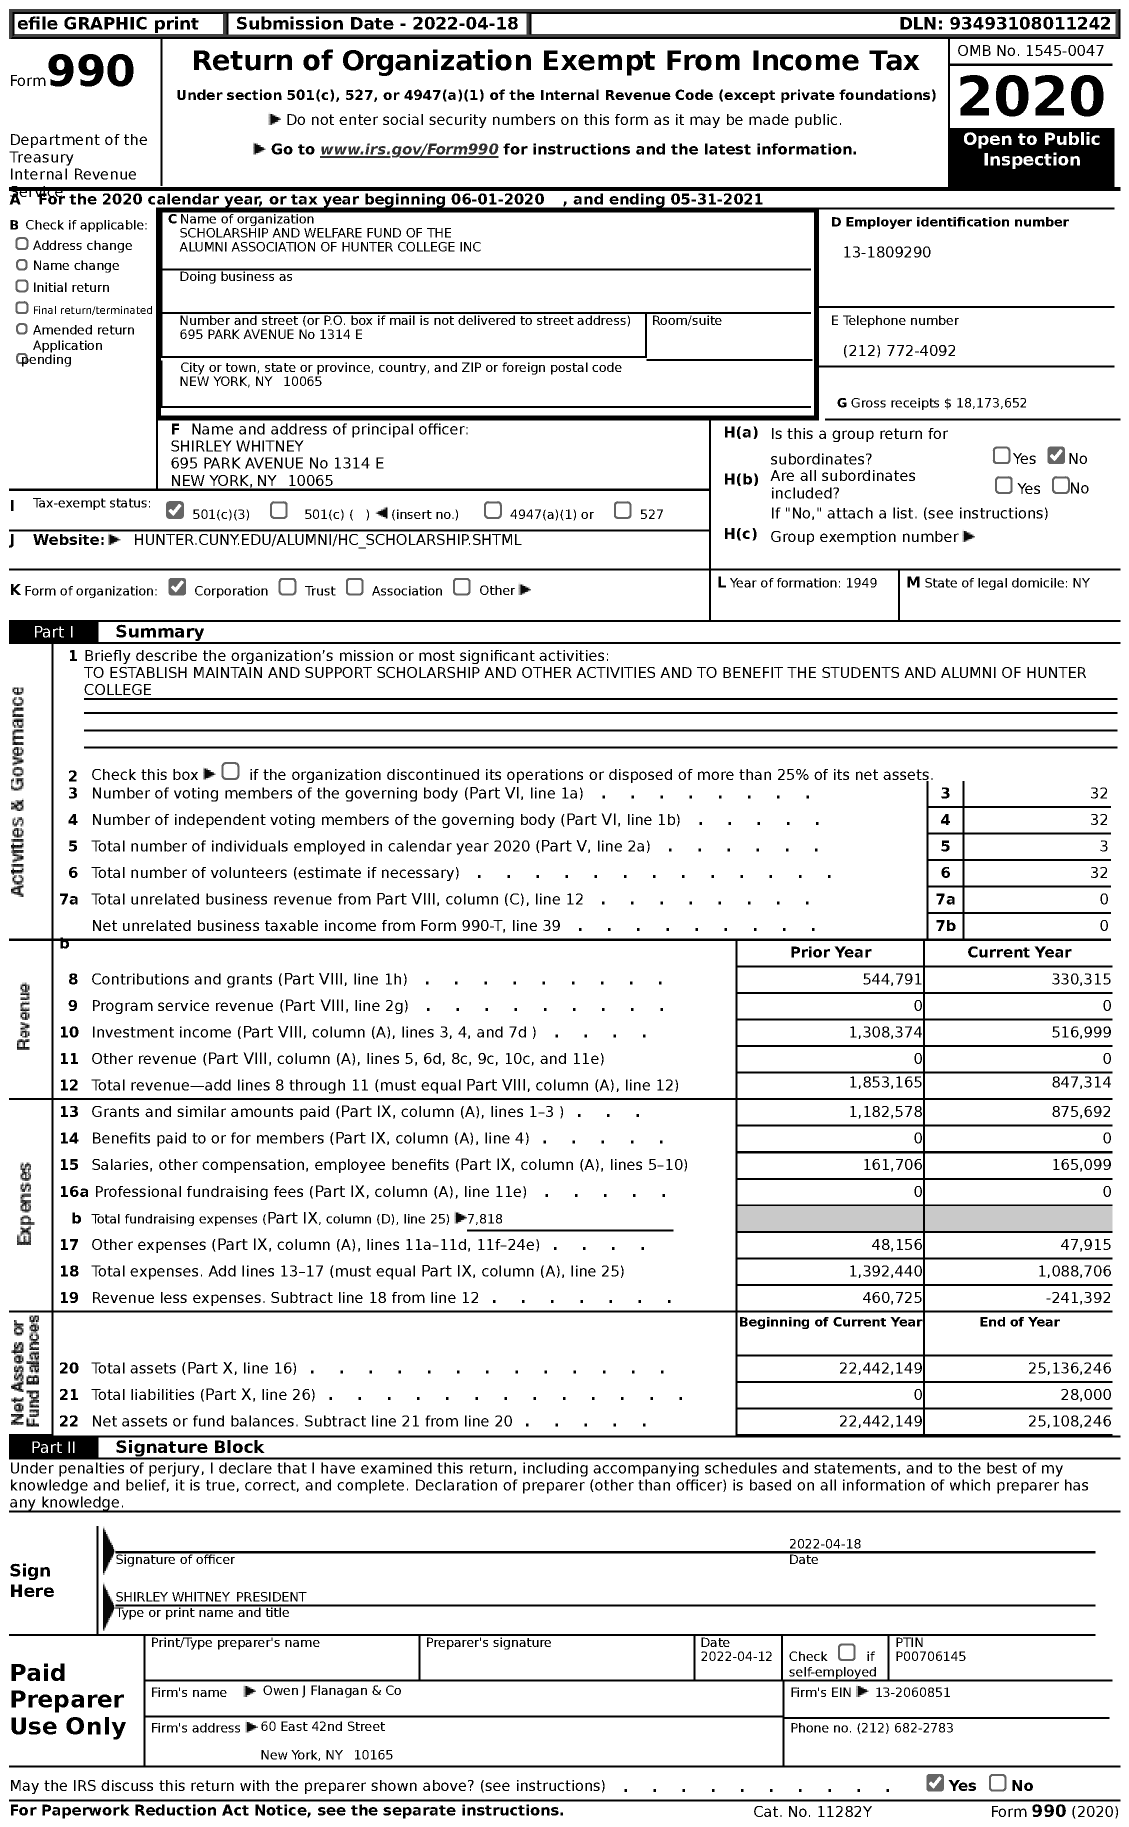 Image of first page of 2020 Form 990 for Scholarship and Welfare Fund of the Alumni Association of Hunter College